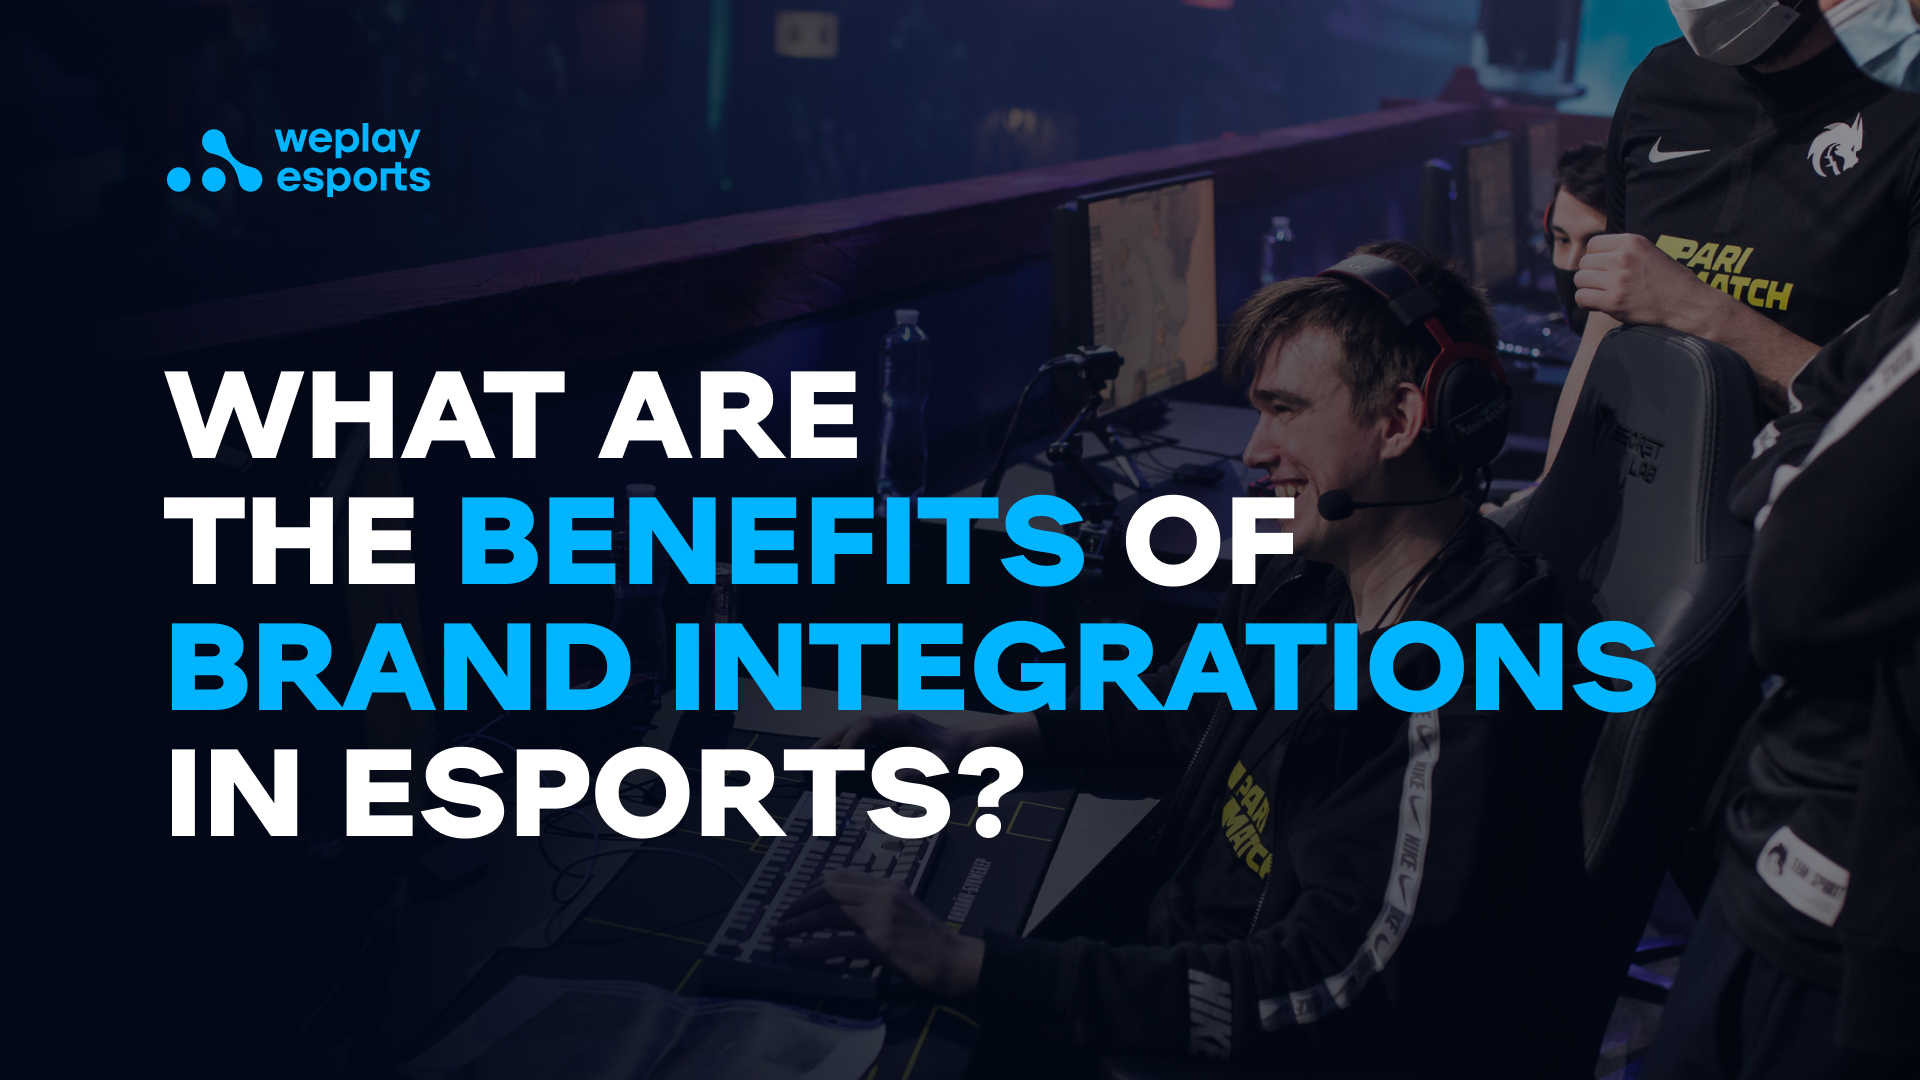 What are the benefits of brand integrations in esports?